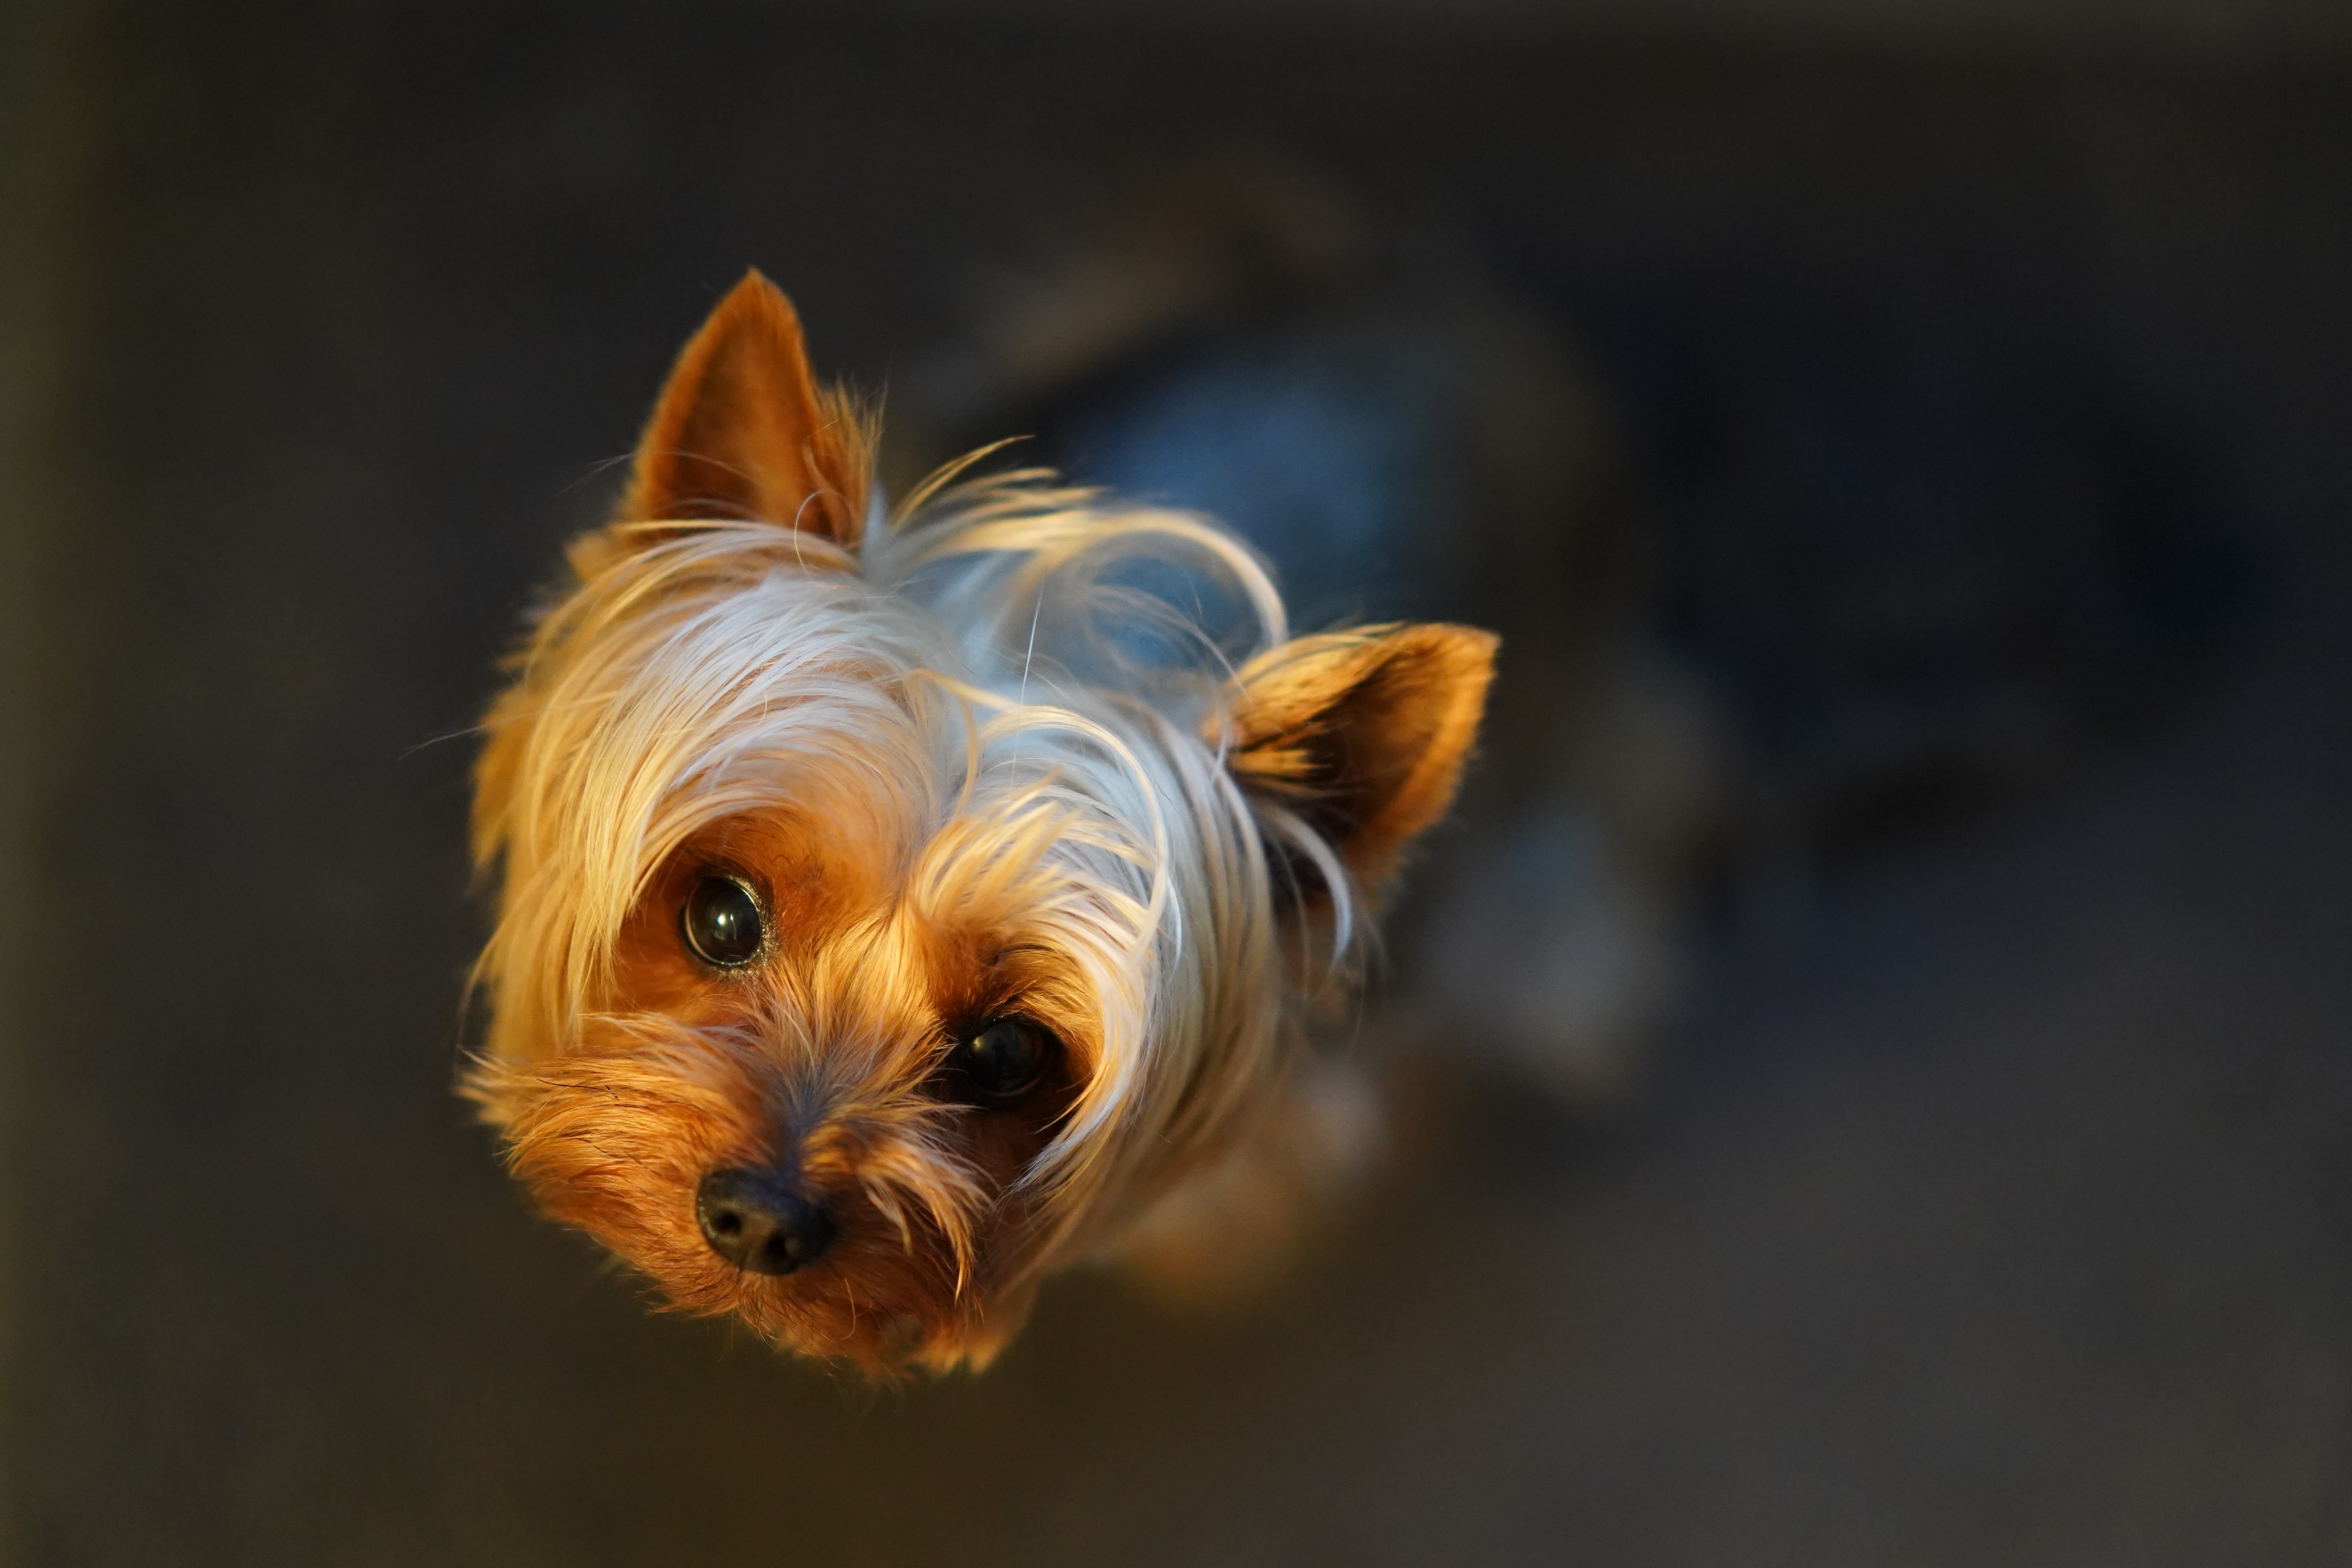 teacup Yorkshire terrier face close up